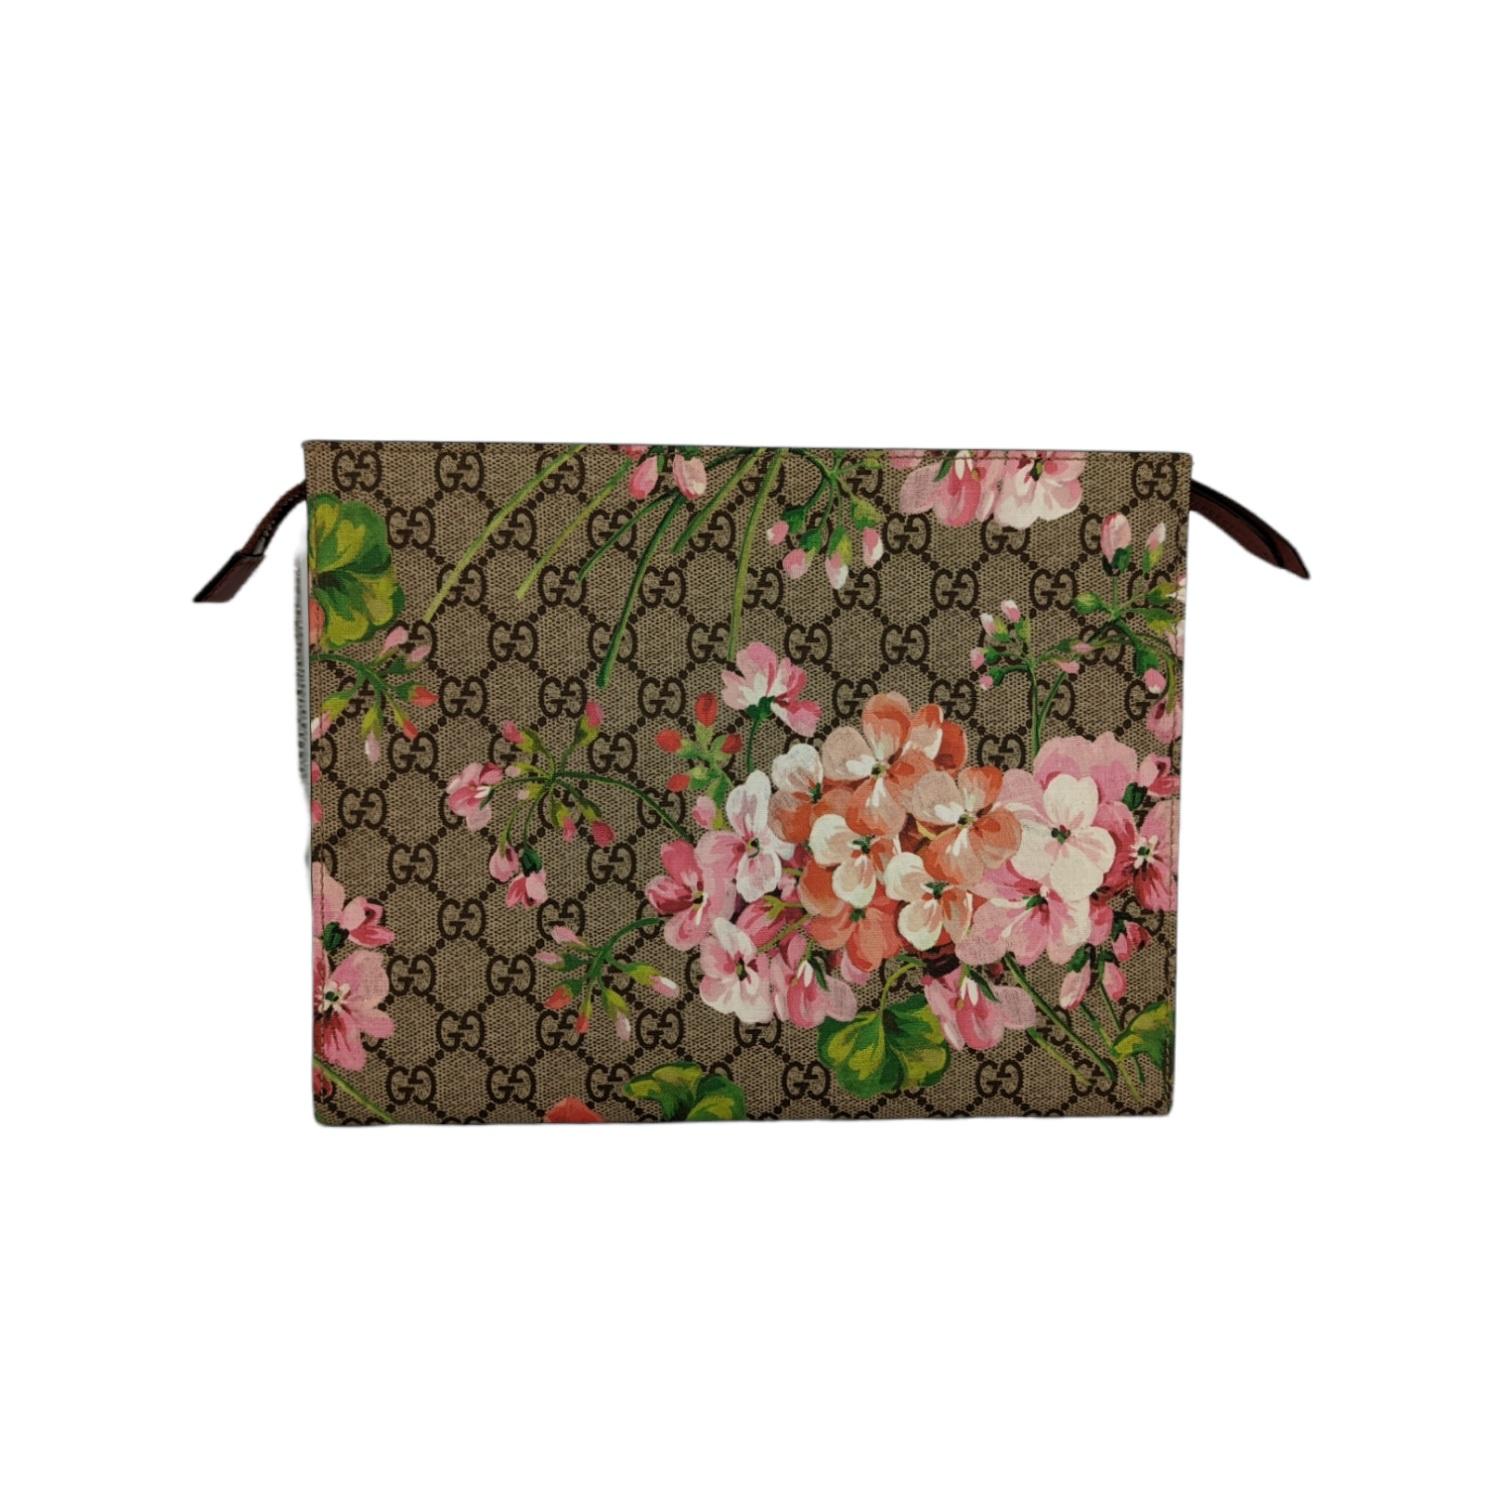 GUCCI GG Supreme Monogram Blooms Print Large Cosmetic Case in Antique Rose. This pouch is crafted of GG monogram coated canvas in brown and beige with a floral pattern overlay. The top zipper opens with a long leather zipper pull to a brown fabric